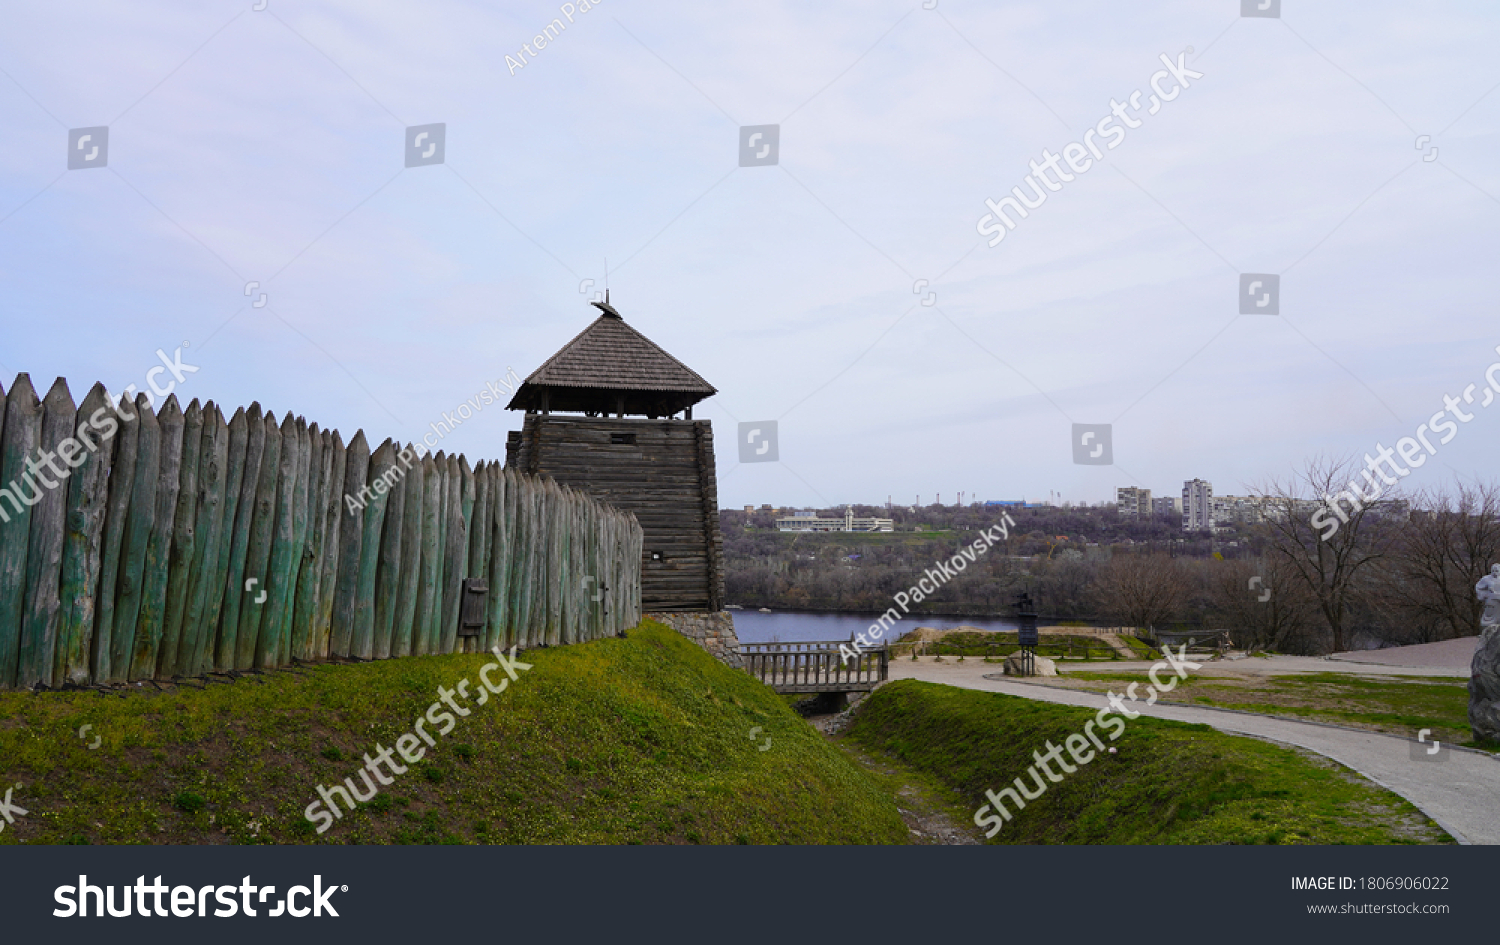 Landscape on a historic temple made of wood in Europe. The fortress is fenced with a wooden palisade against the background of the sky and the river. Thick beams with a sharp top. #1806906022